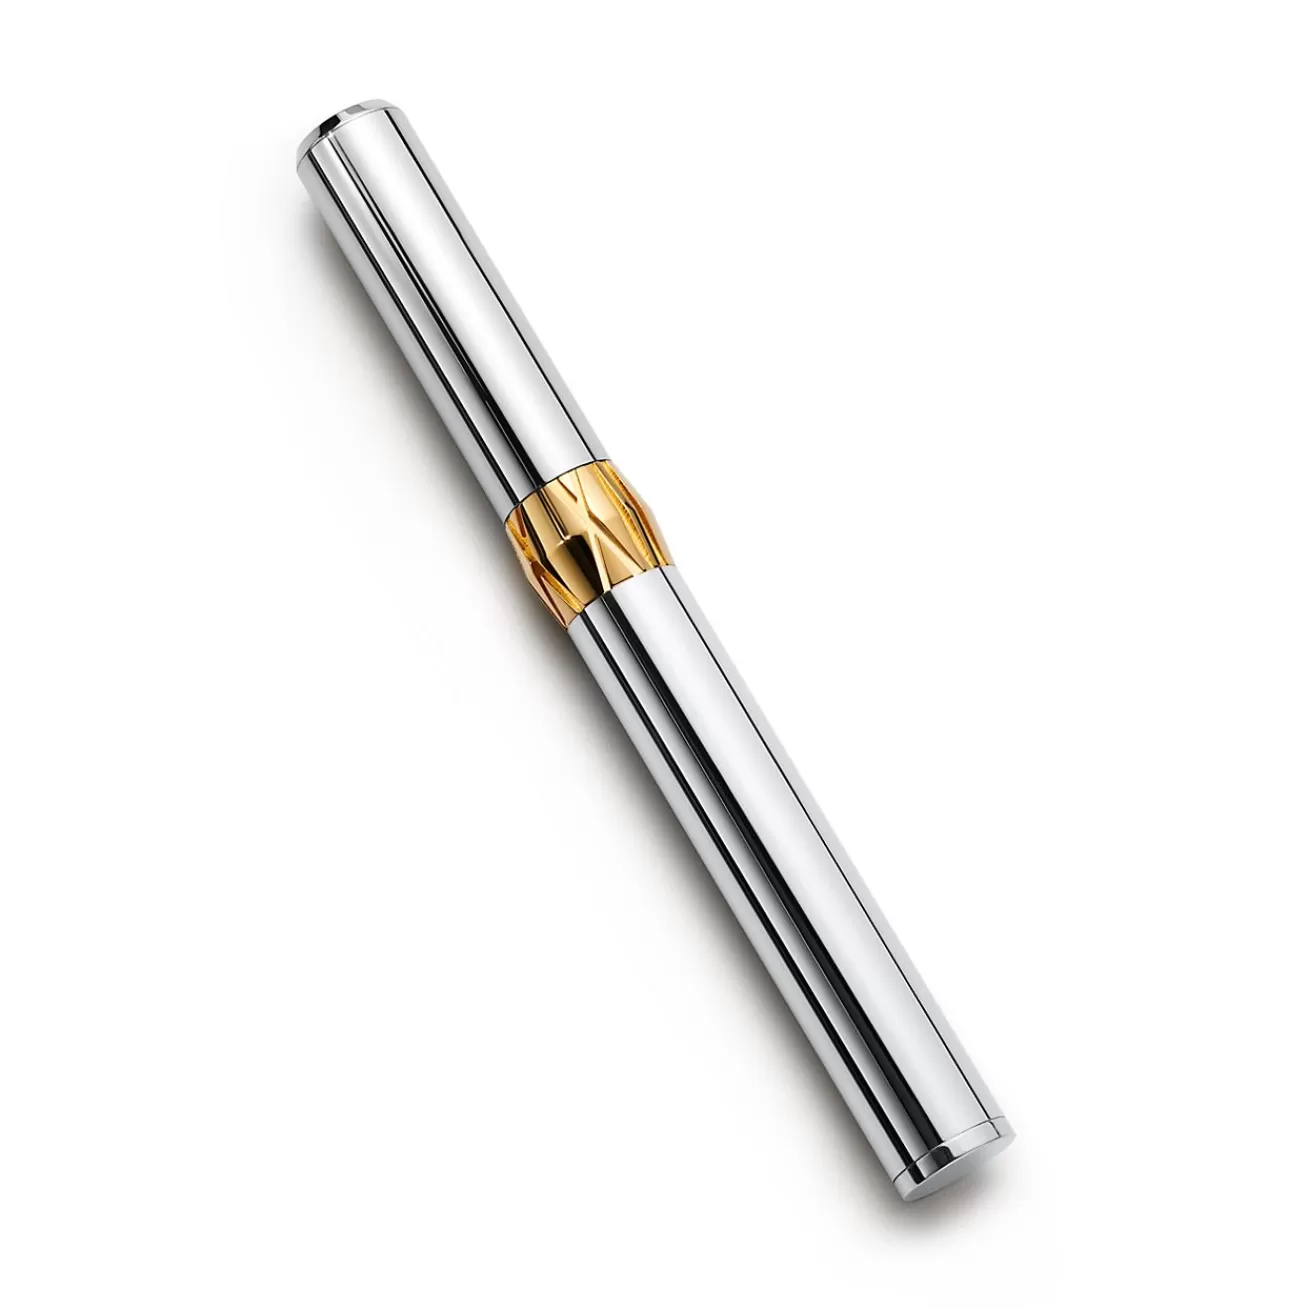 Tiffany & Co. Atlas® Fountain Pen in Sterling Silver with Gold Vermeil | ^ The Home | Housewarming Gifts